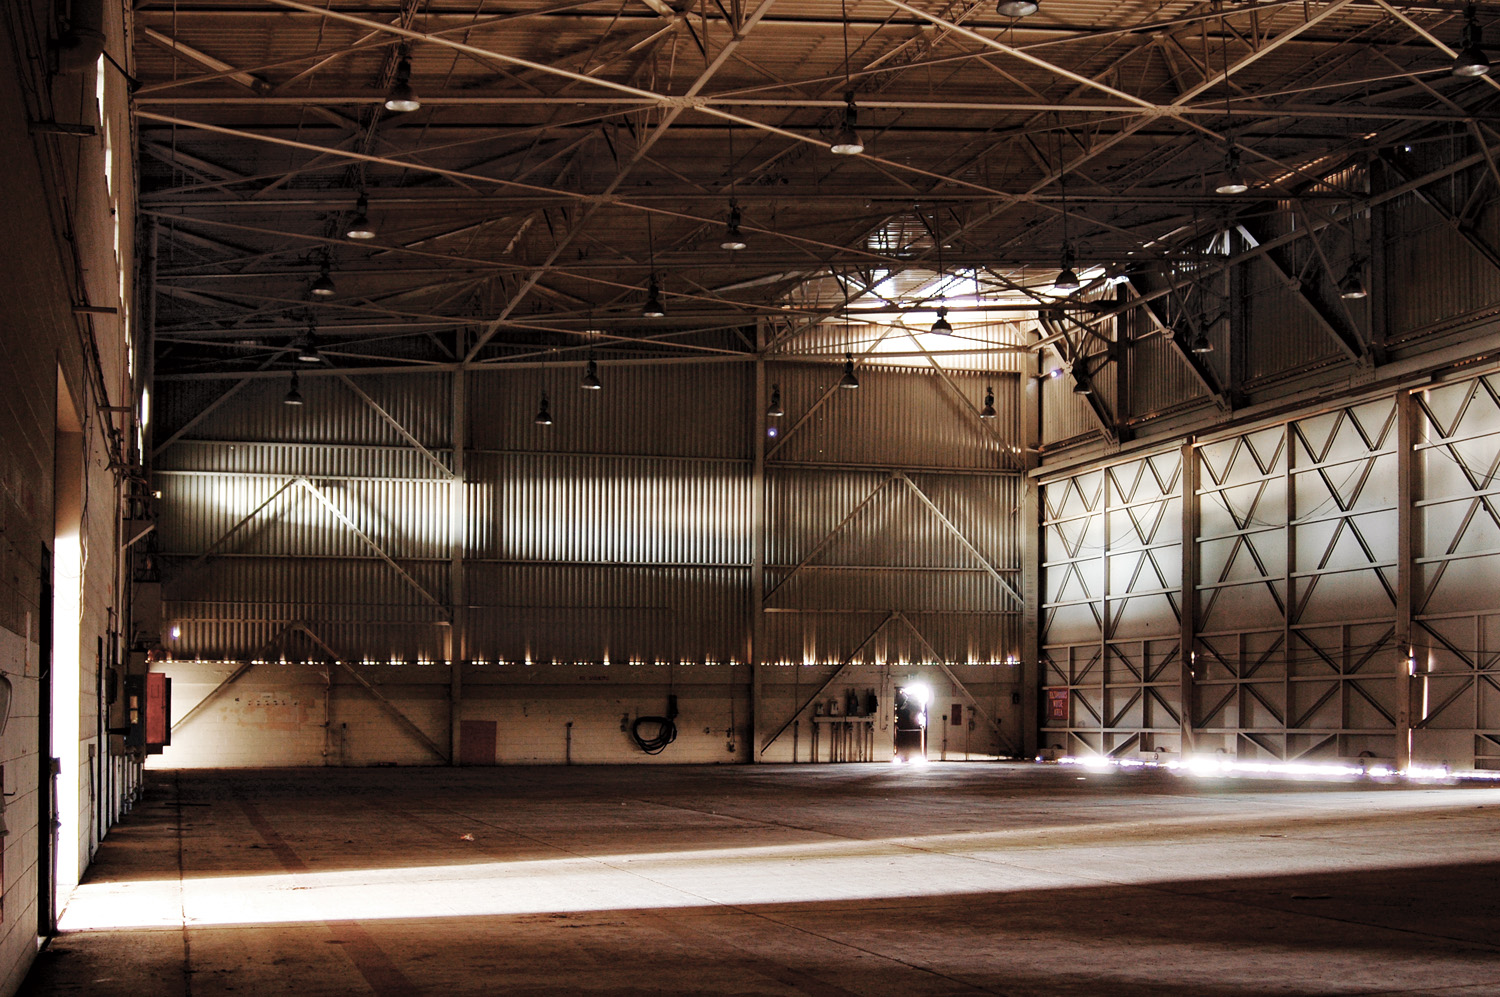 The entirety of Building #115 (F-18 hanger) at the abandoned El Toto Marine Corps Air Station in Southern California was transformed into a massive camera.